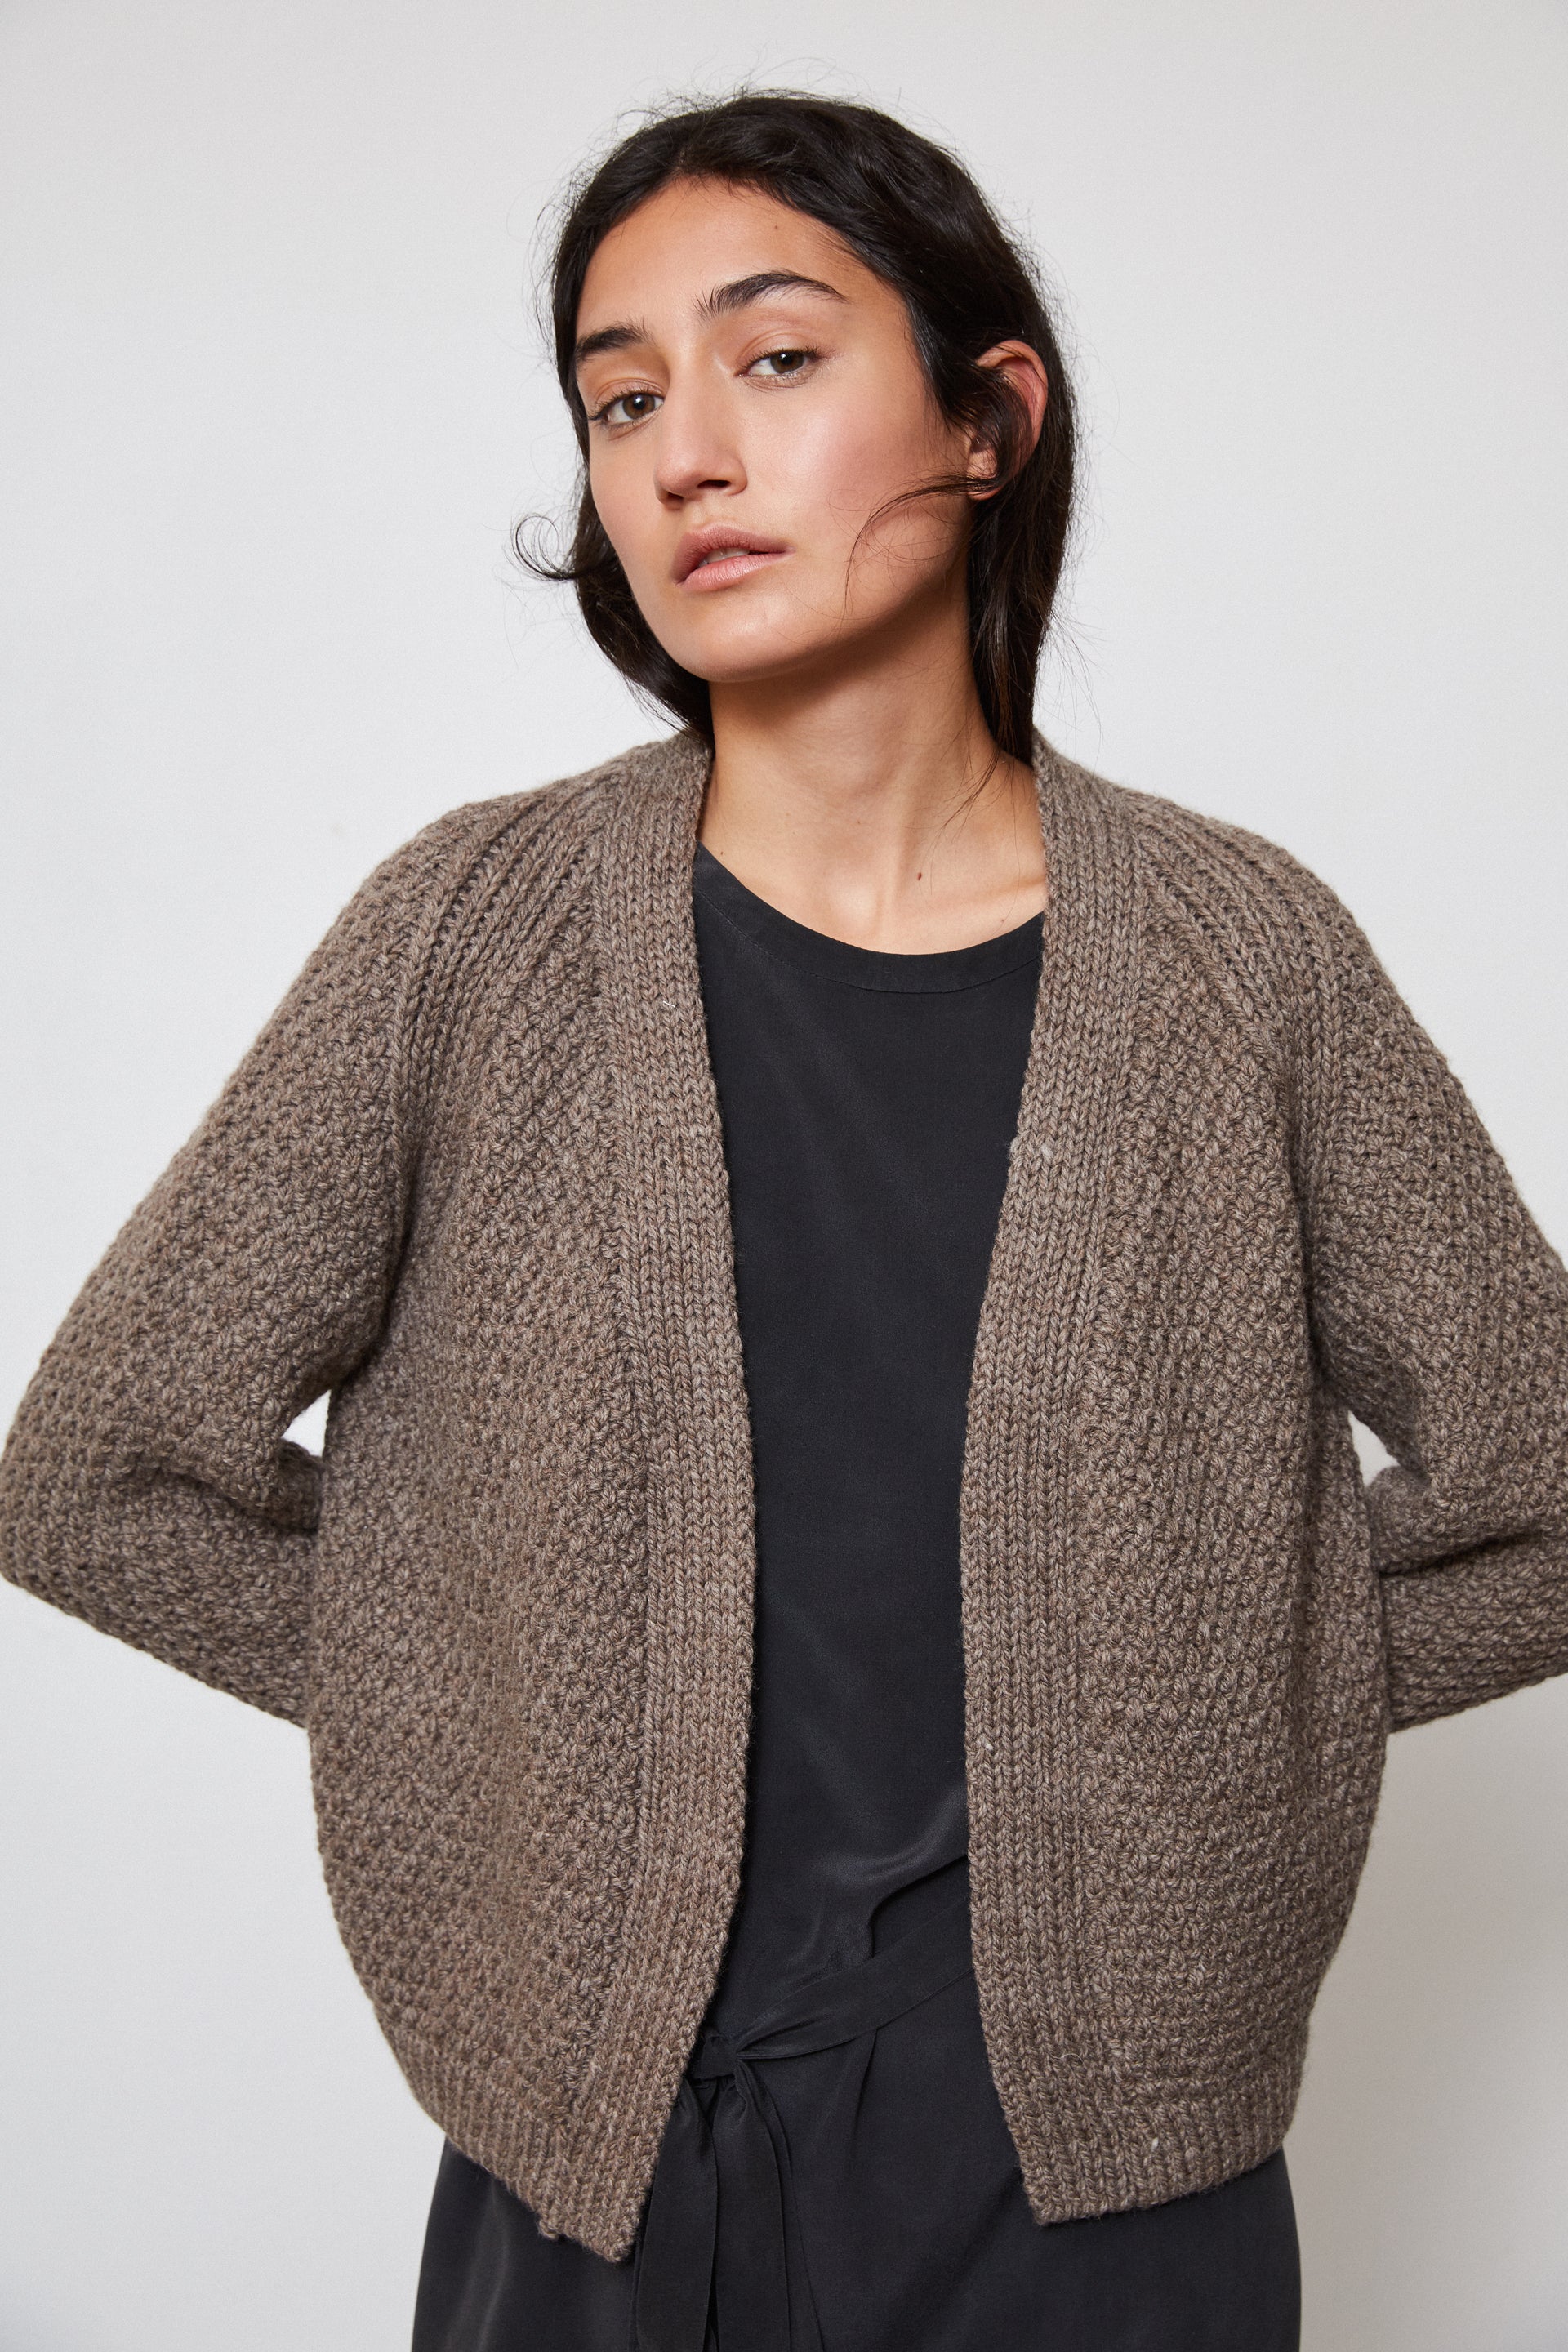 HAND KNITTED SAUCO WOOL CARDIGAN - CUB - ound